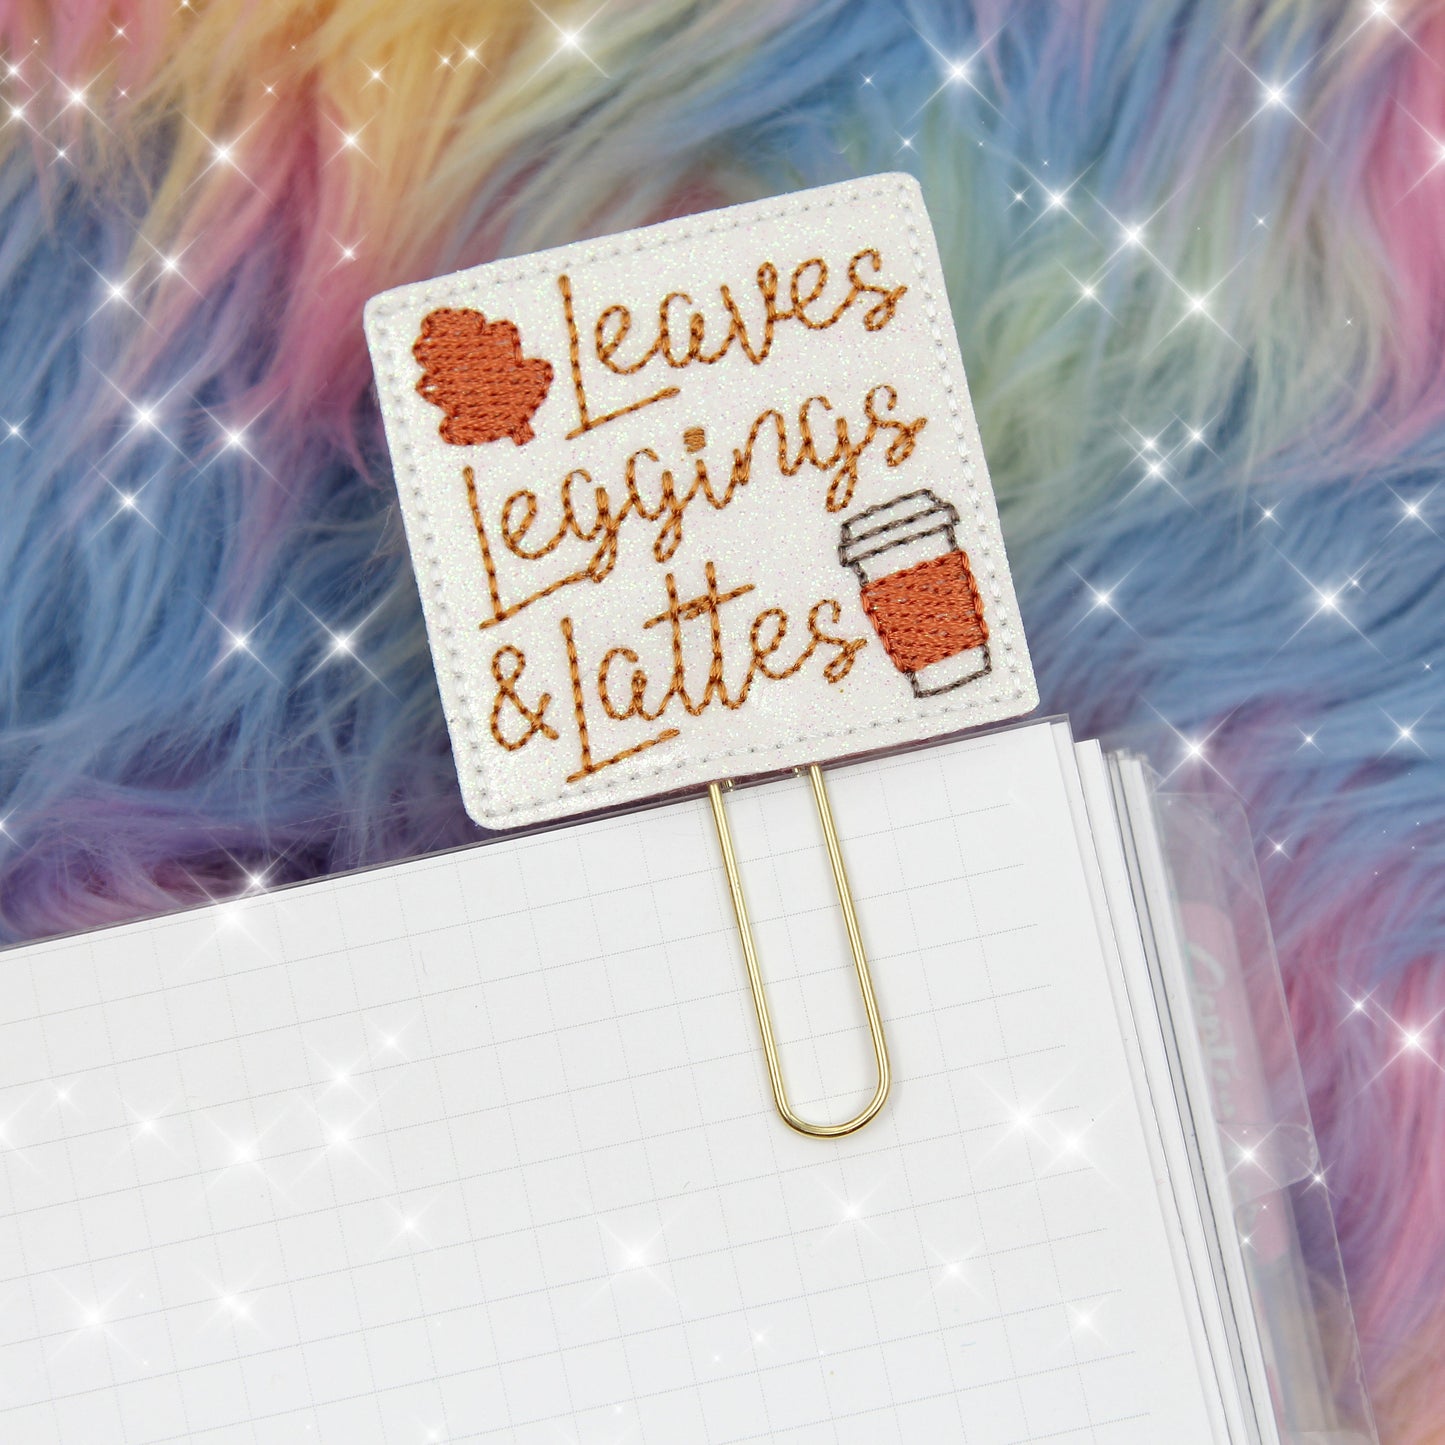 Leaves Leggings And Lattes Planner Clip